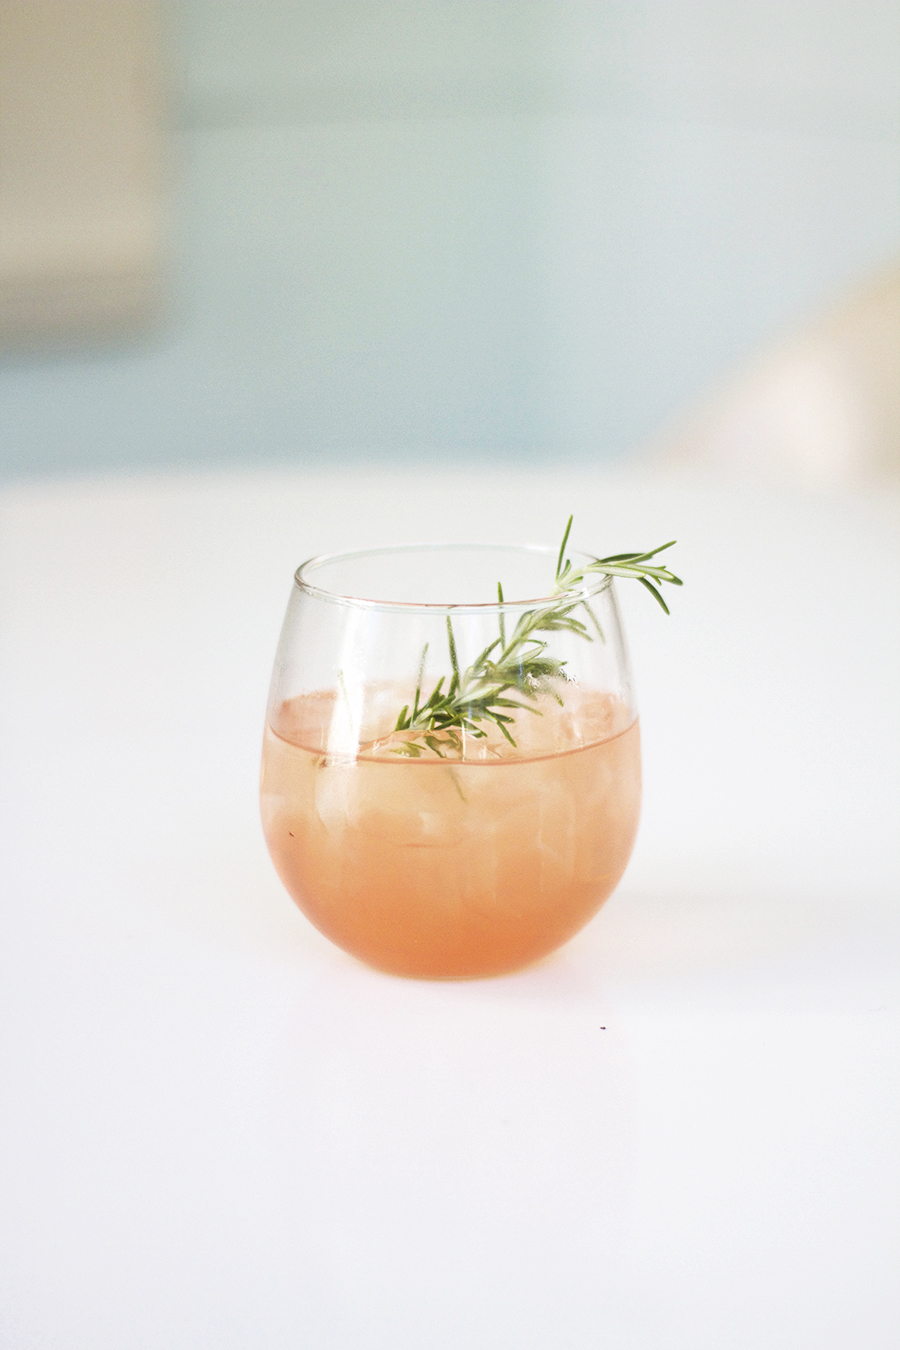 Solveig Gin with Rosemary and Grapefruit